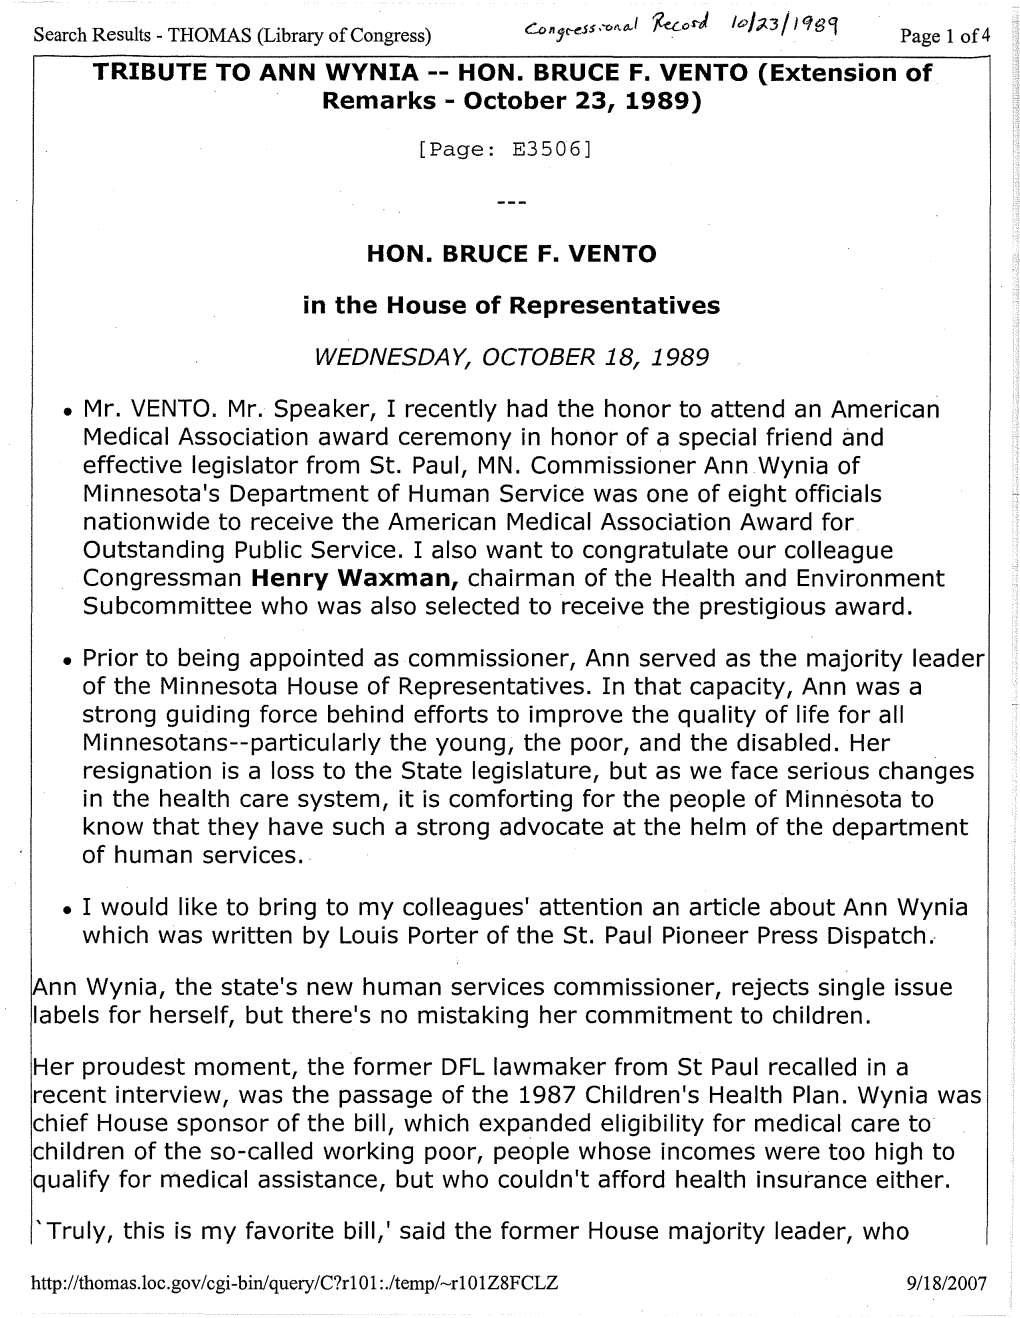 TRIBUTE to ANN WYNIA -- HON. BRUCE F. VENTO (Extension of Remarks - October 23, 1989)